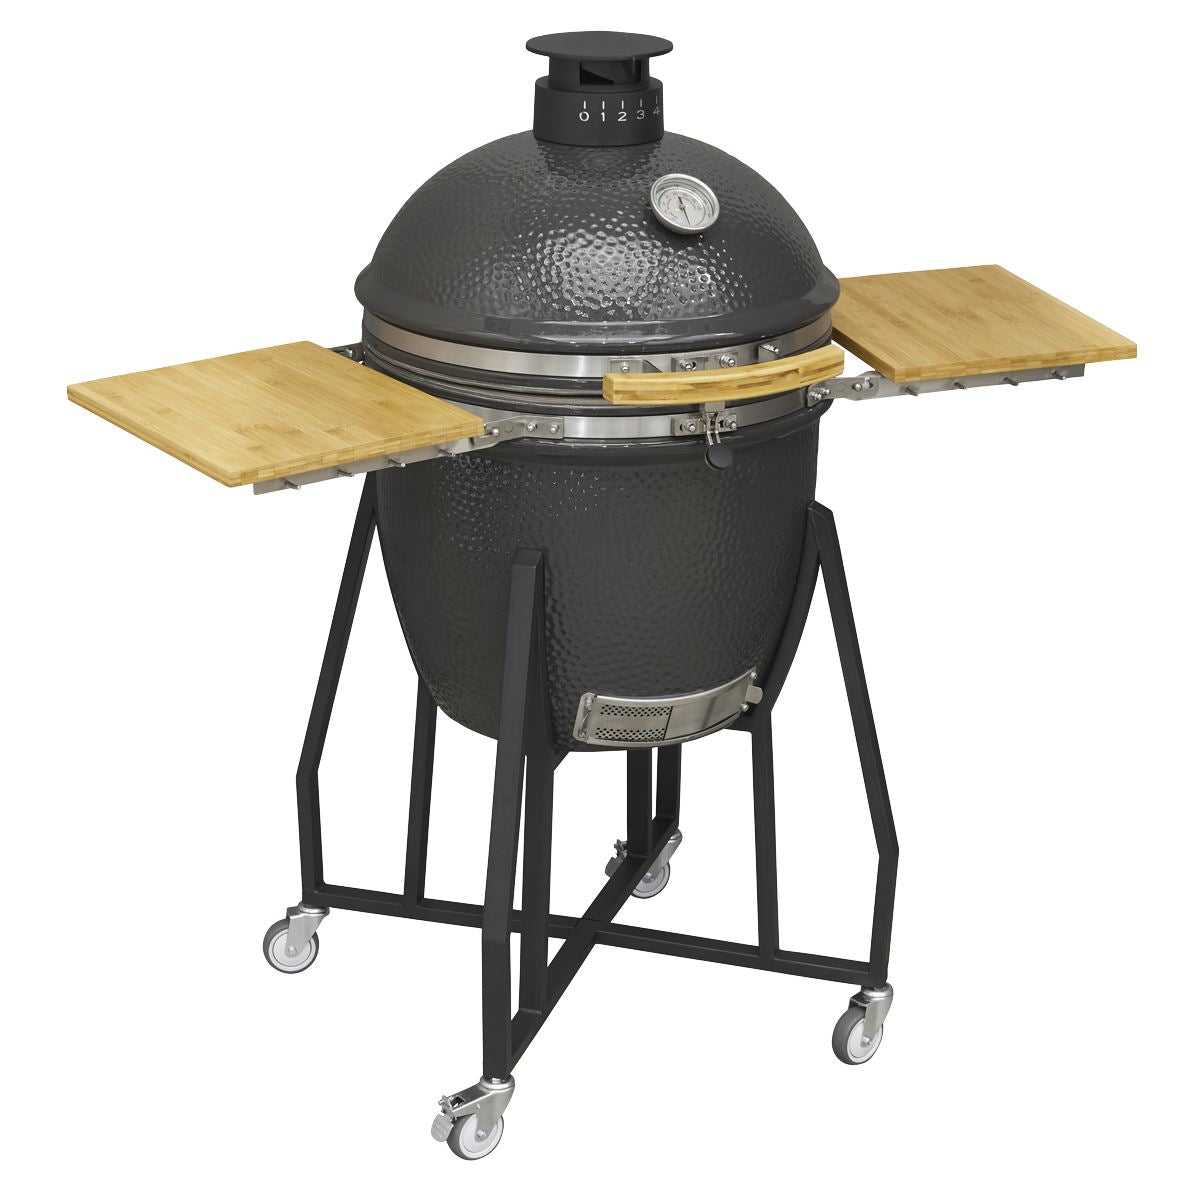 Dellonda Deluxe 22"(56cm) Ceramic Kamado Style BBQ Grill/Oven/Smoker, Supplied with Wheeled Stand